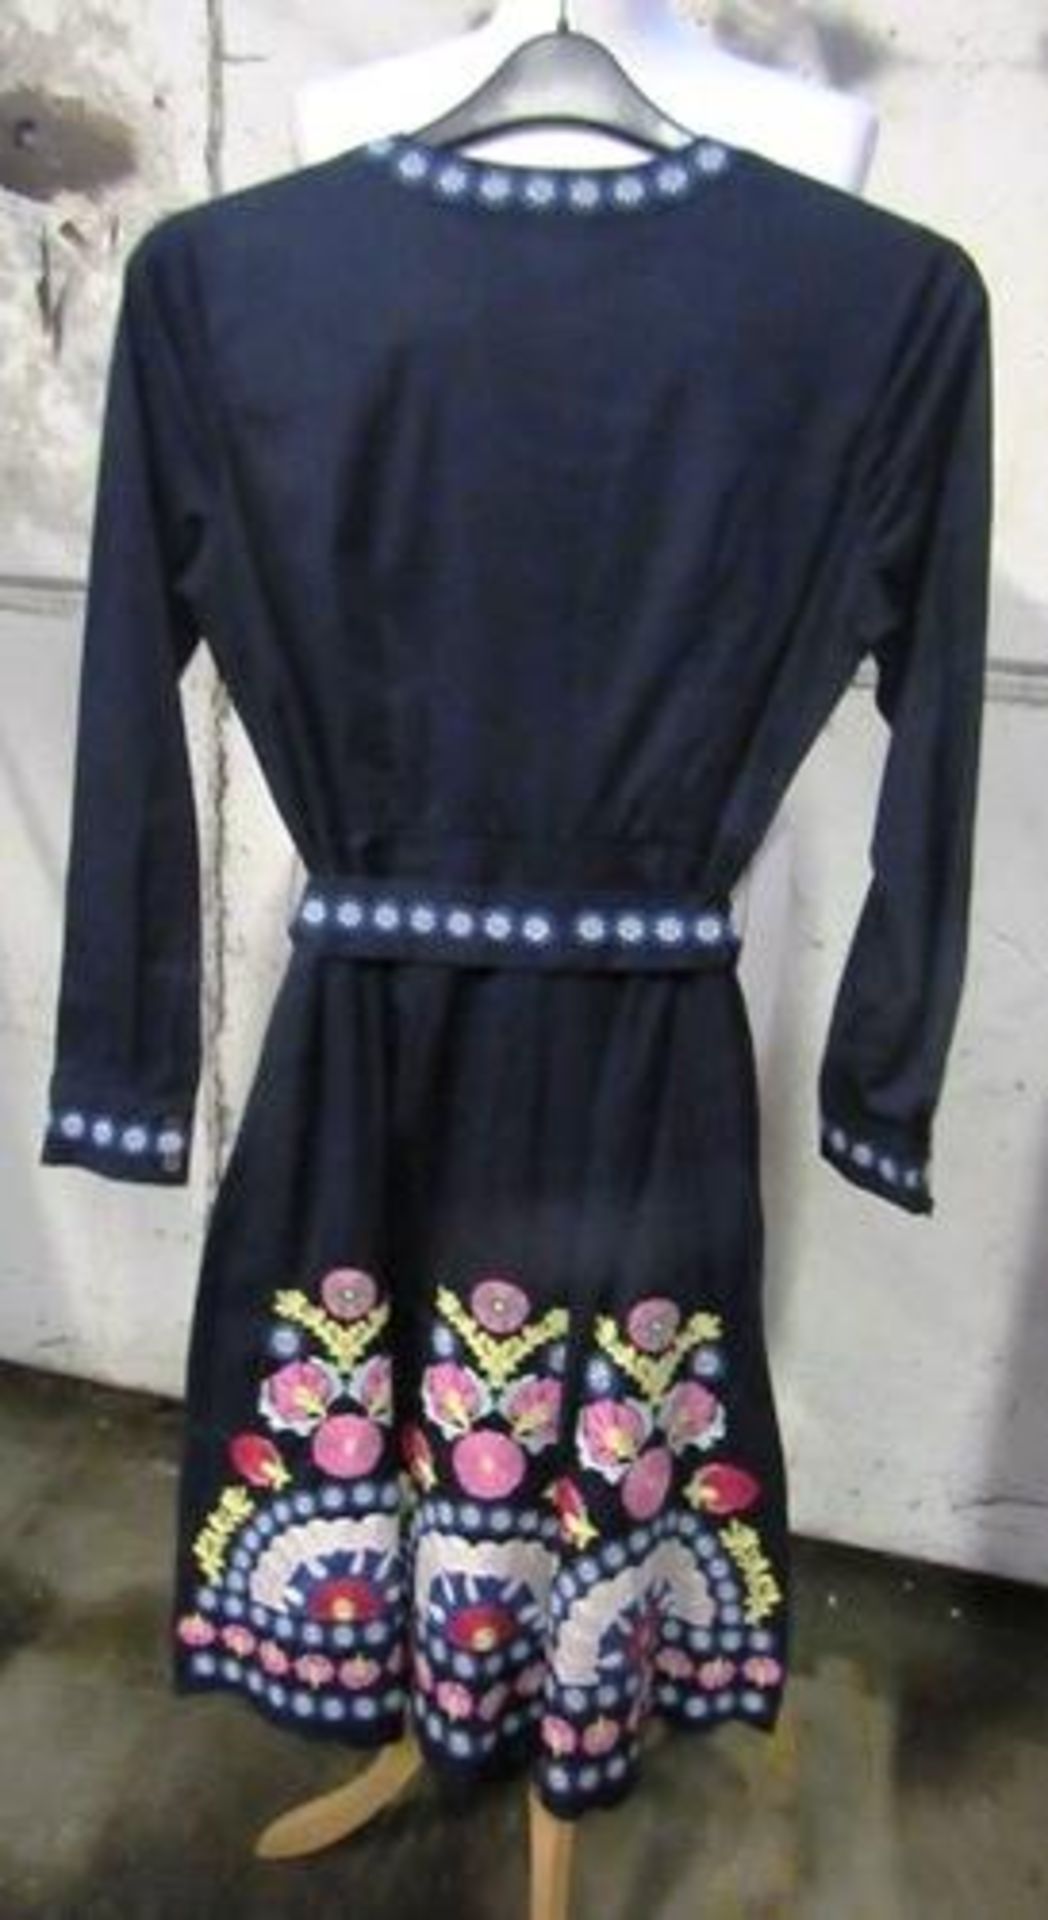 1 x Boden Riley navy embroidered dress, UK size 12P. Code W0633NAV - New with tags (clothesrail1) - Image 2 of 3